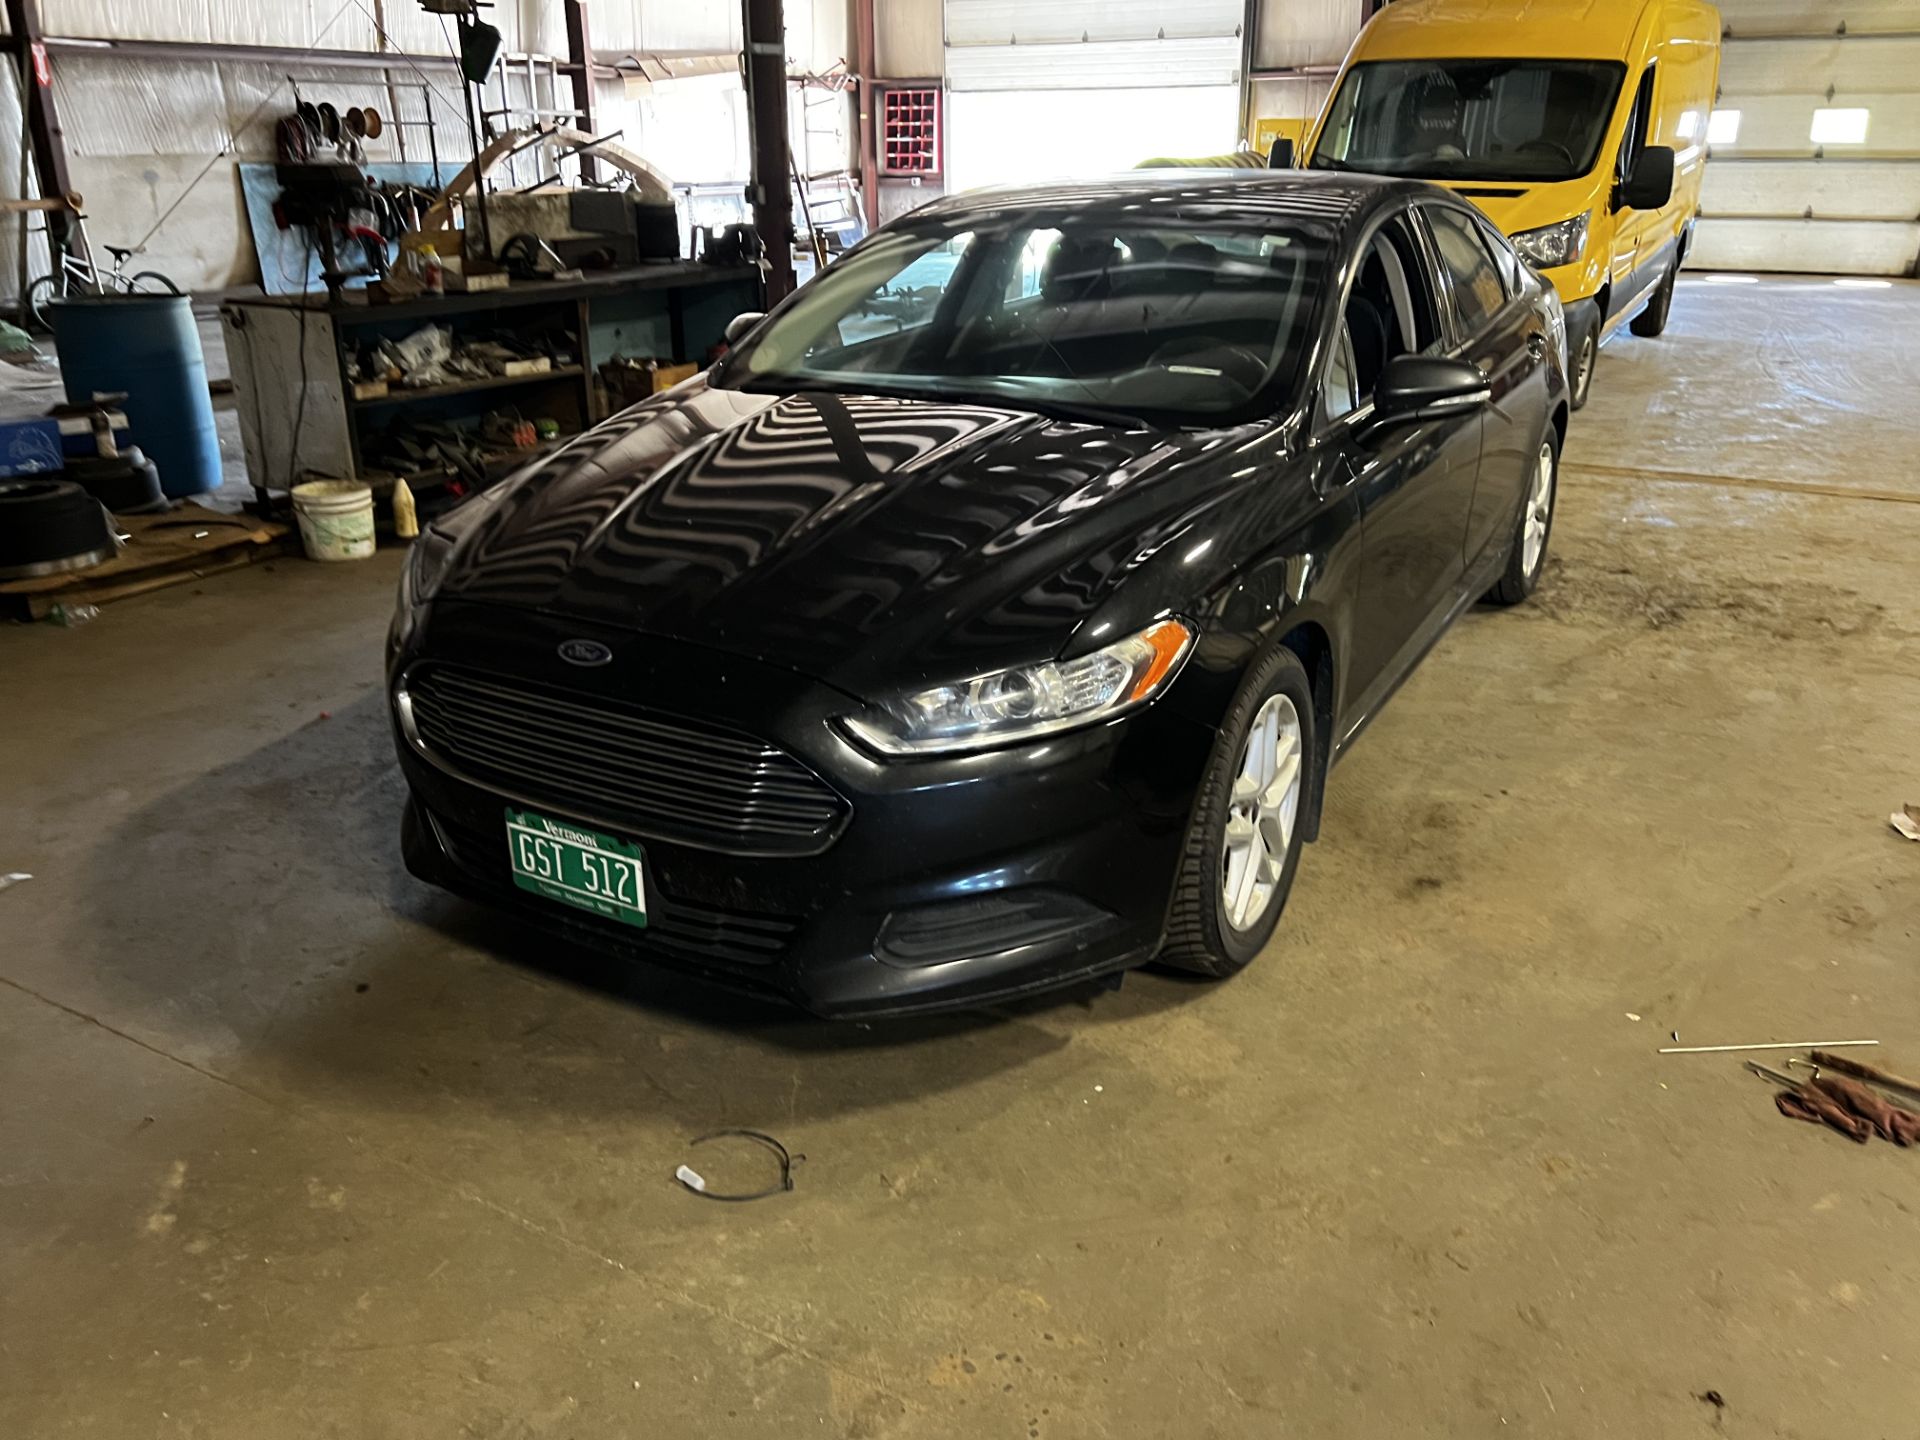 2014 Ford Fusion SE, Auto, A/C, Moonroof, FR Wheel Drive, 4 Cyl, Gas, 2.5 L, (Passenger Outside - Image 3 of 10